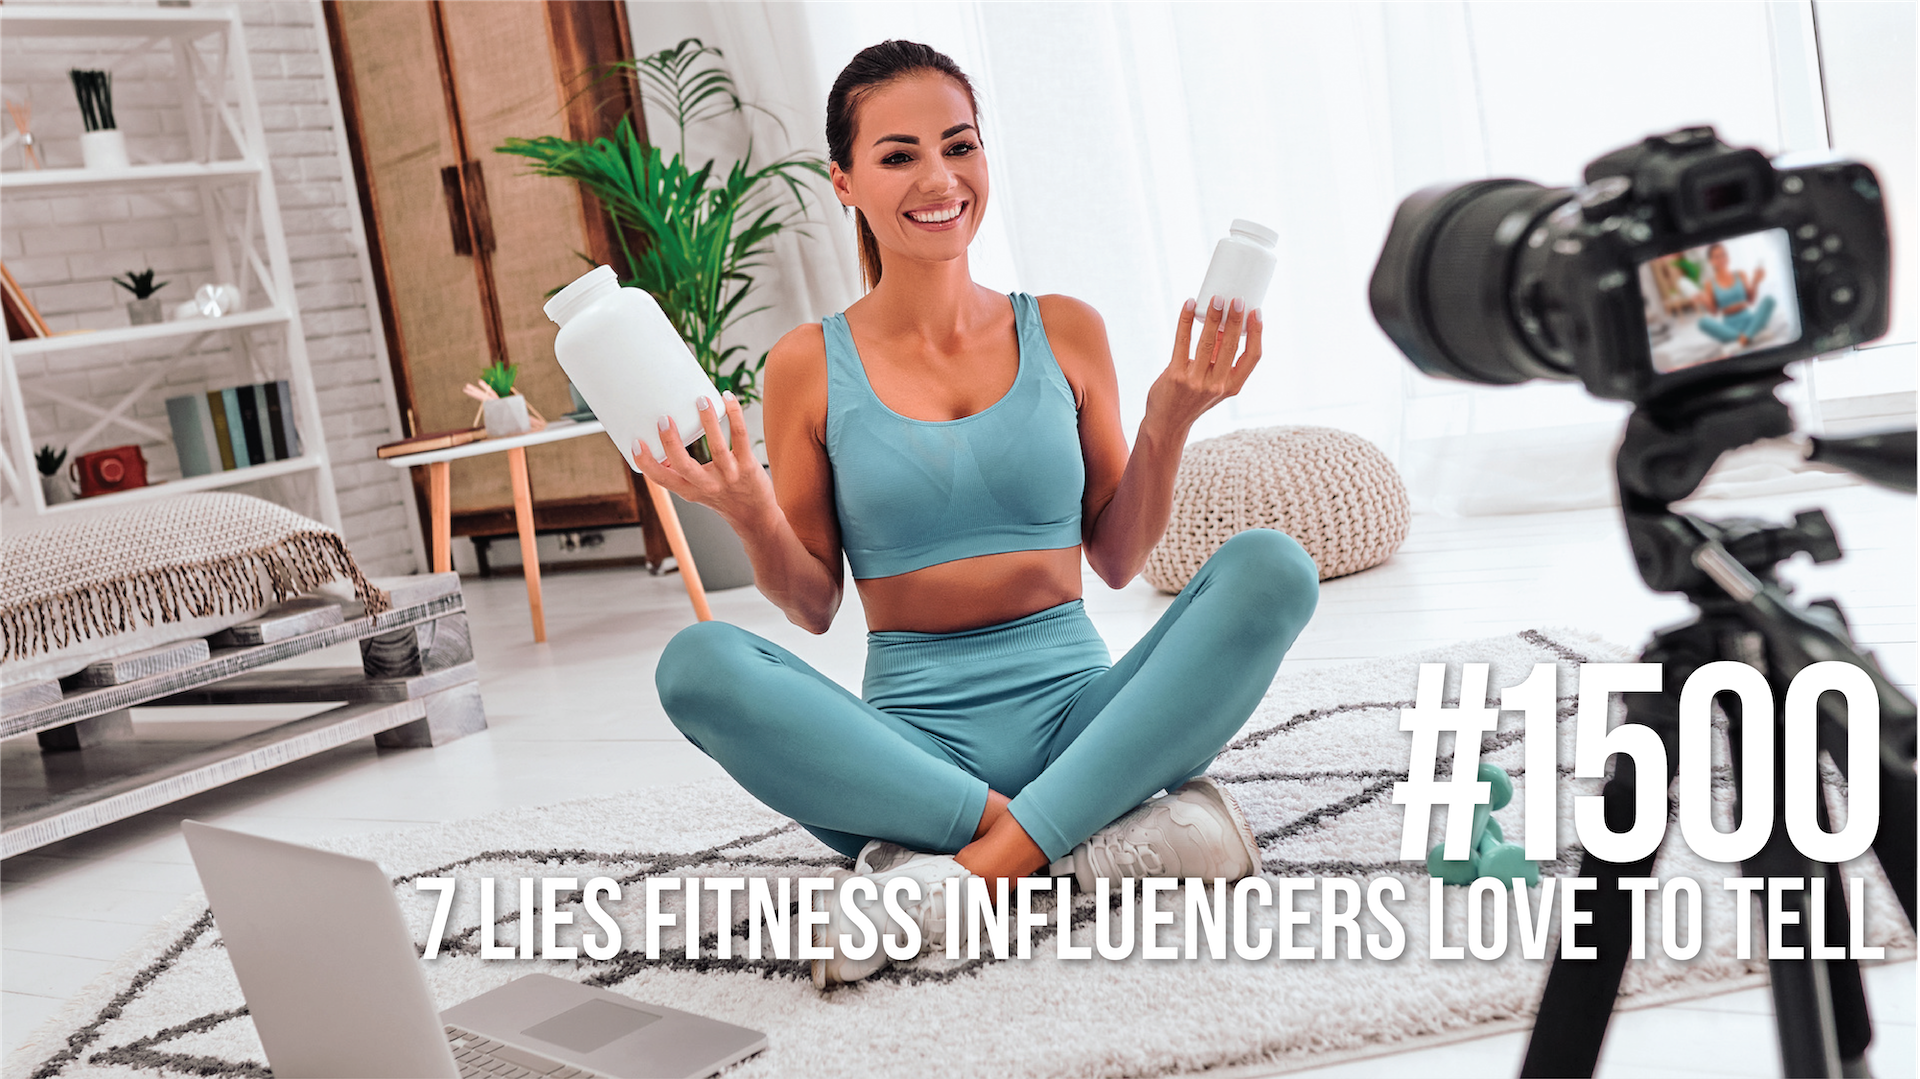 1500: Seven Lies Fitness Influencers Love to Tell